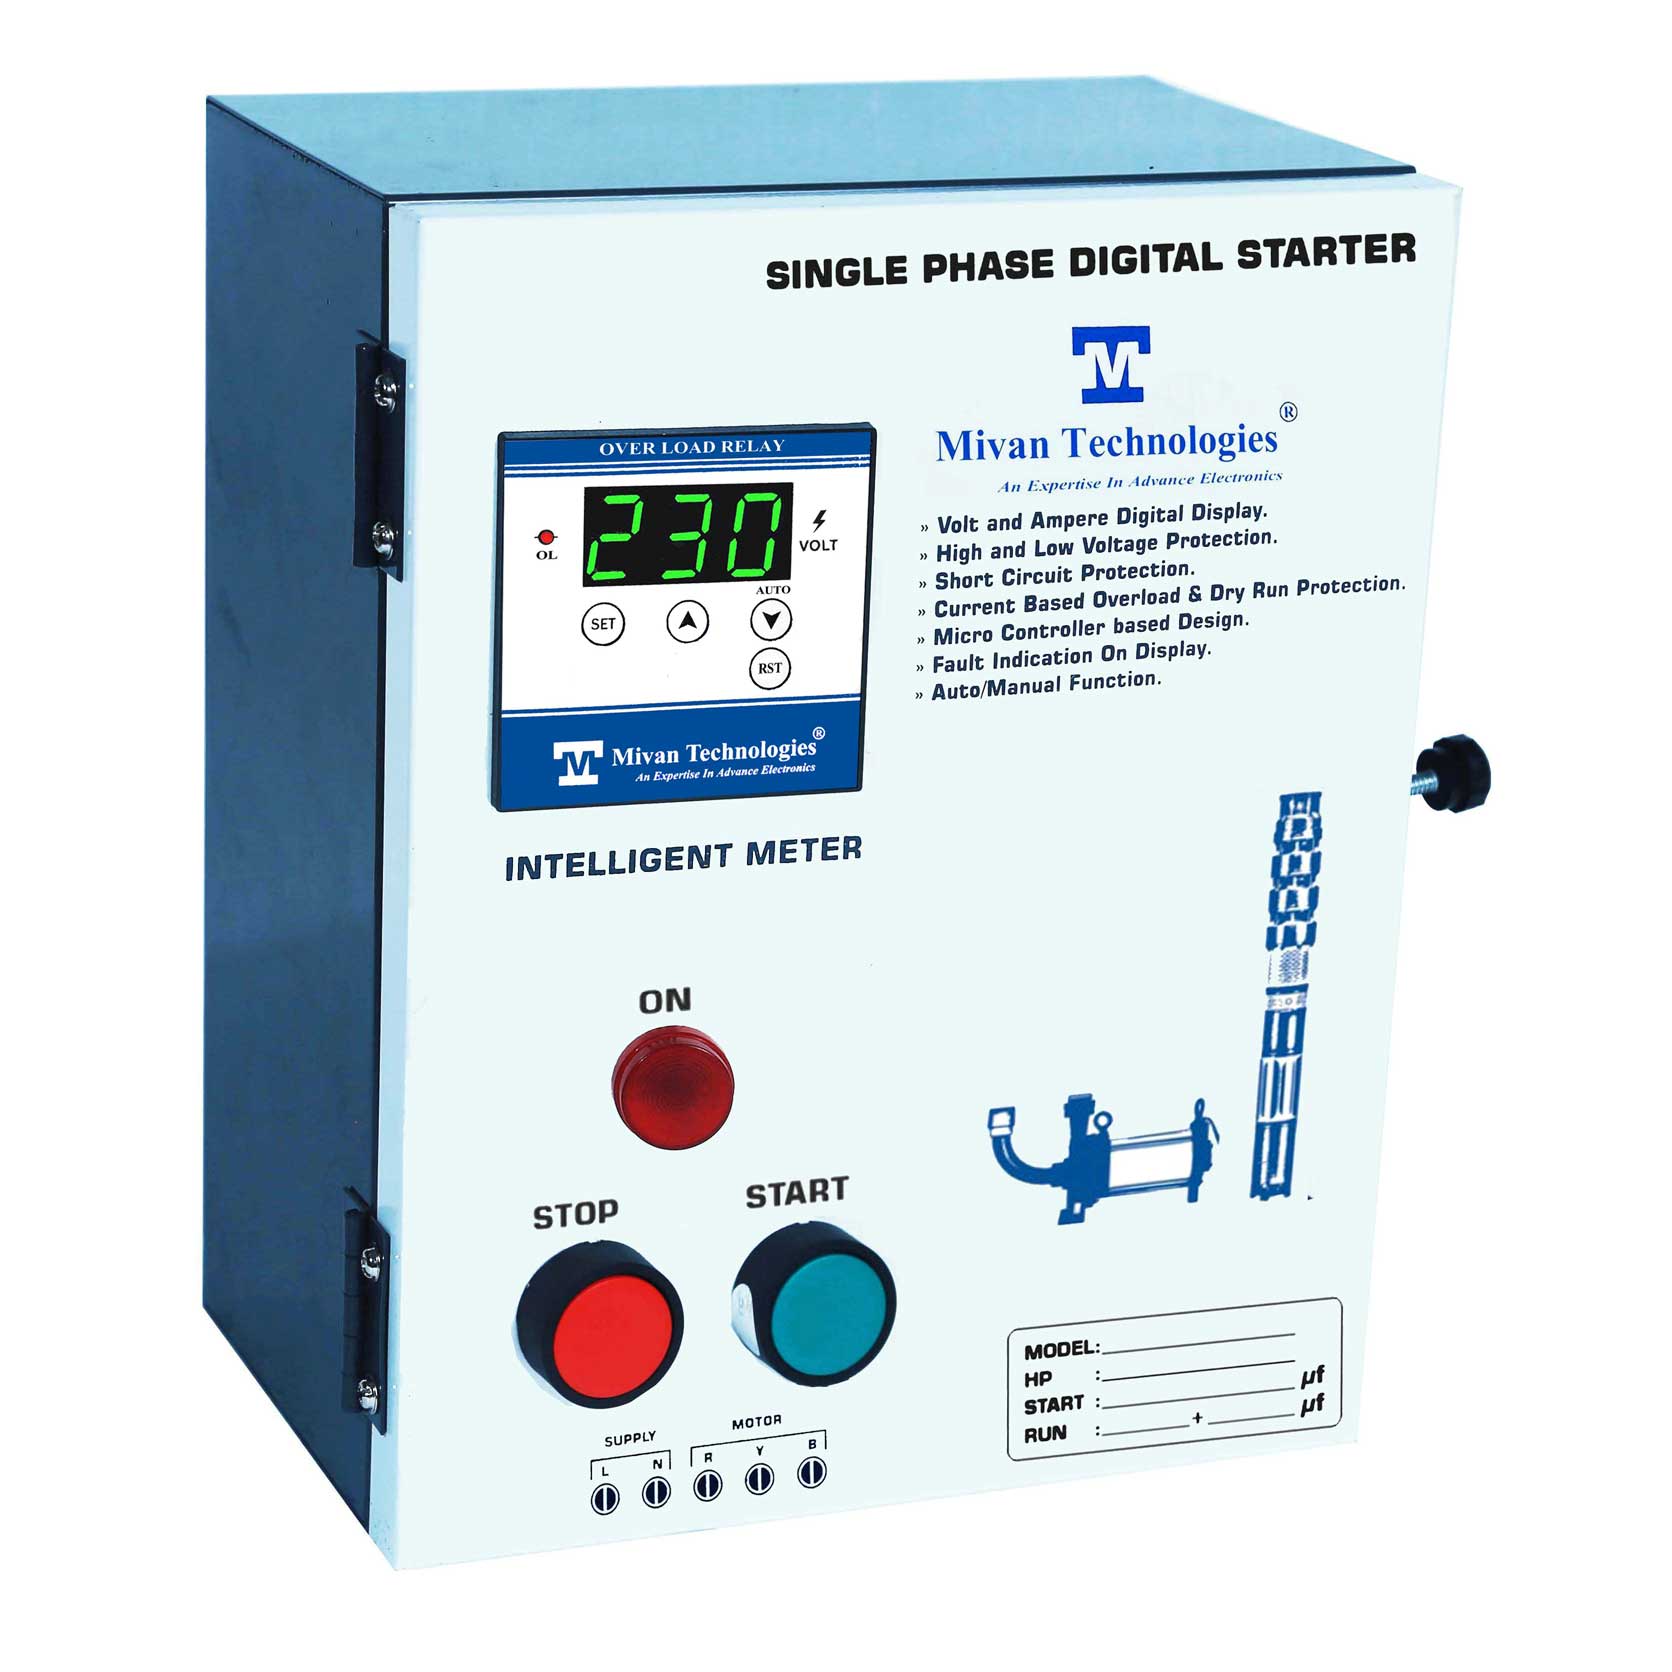 DS SR METAL Digital motor starter panel with start and run capacitor with volt and amp meter with HV LV OL DRY RUN Protection with timer suitable up to 1.5 HP motor